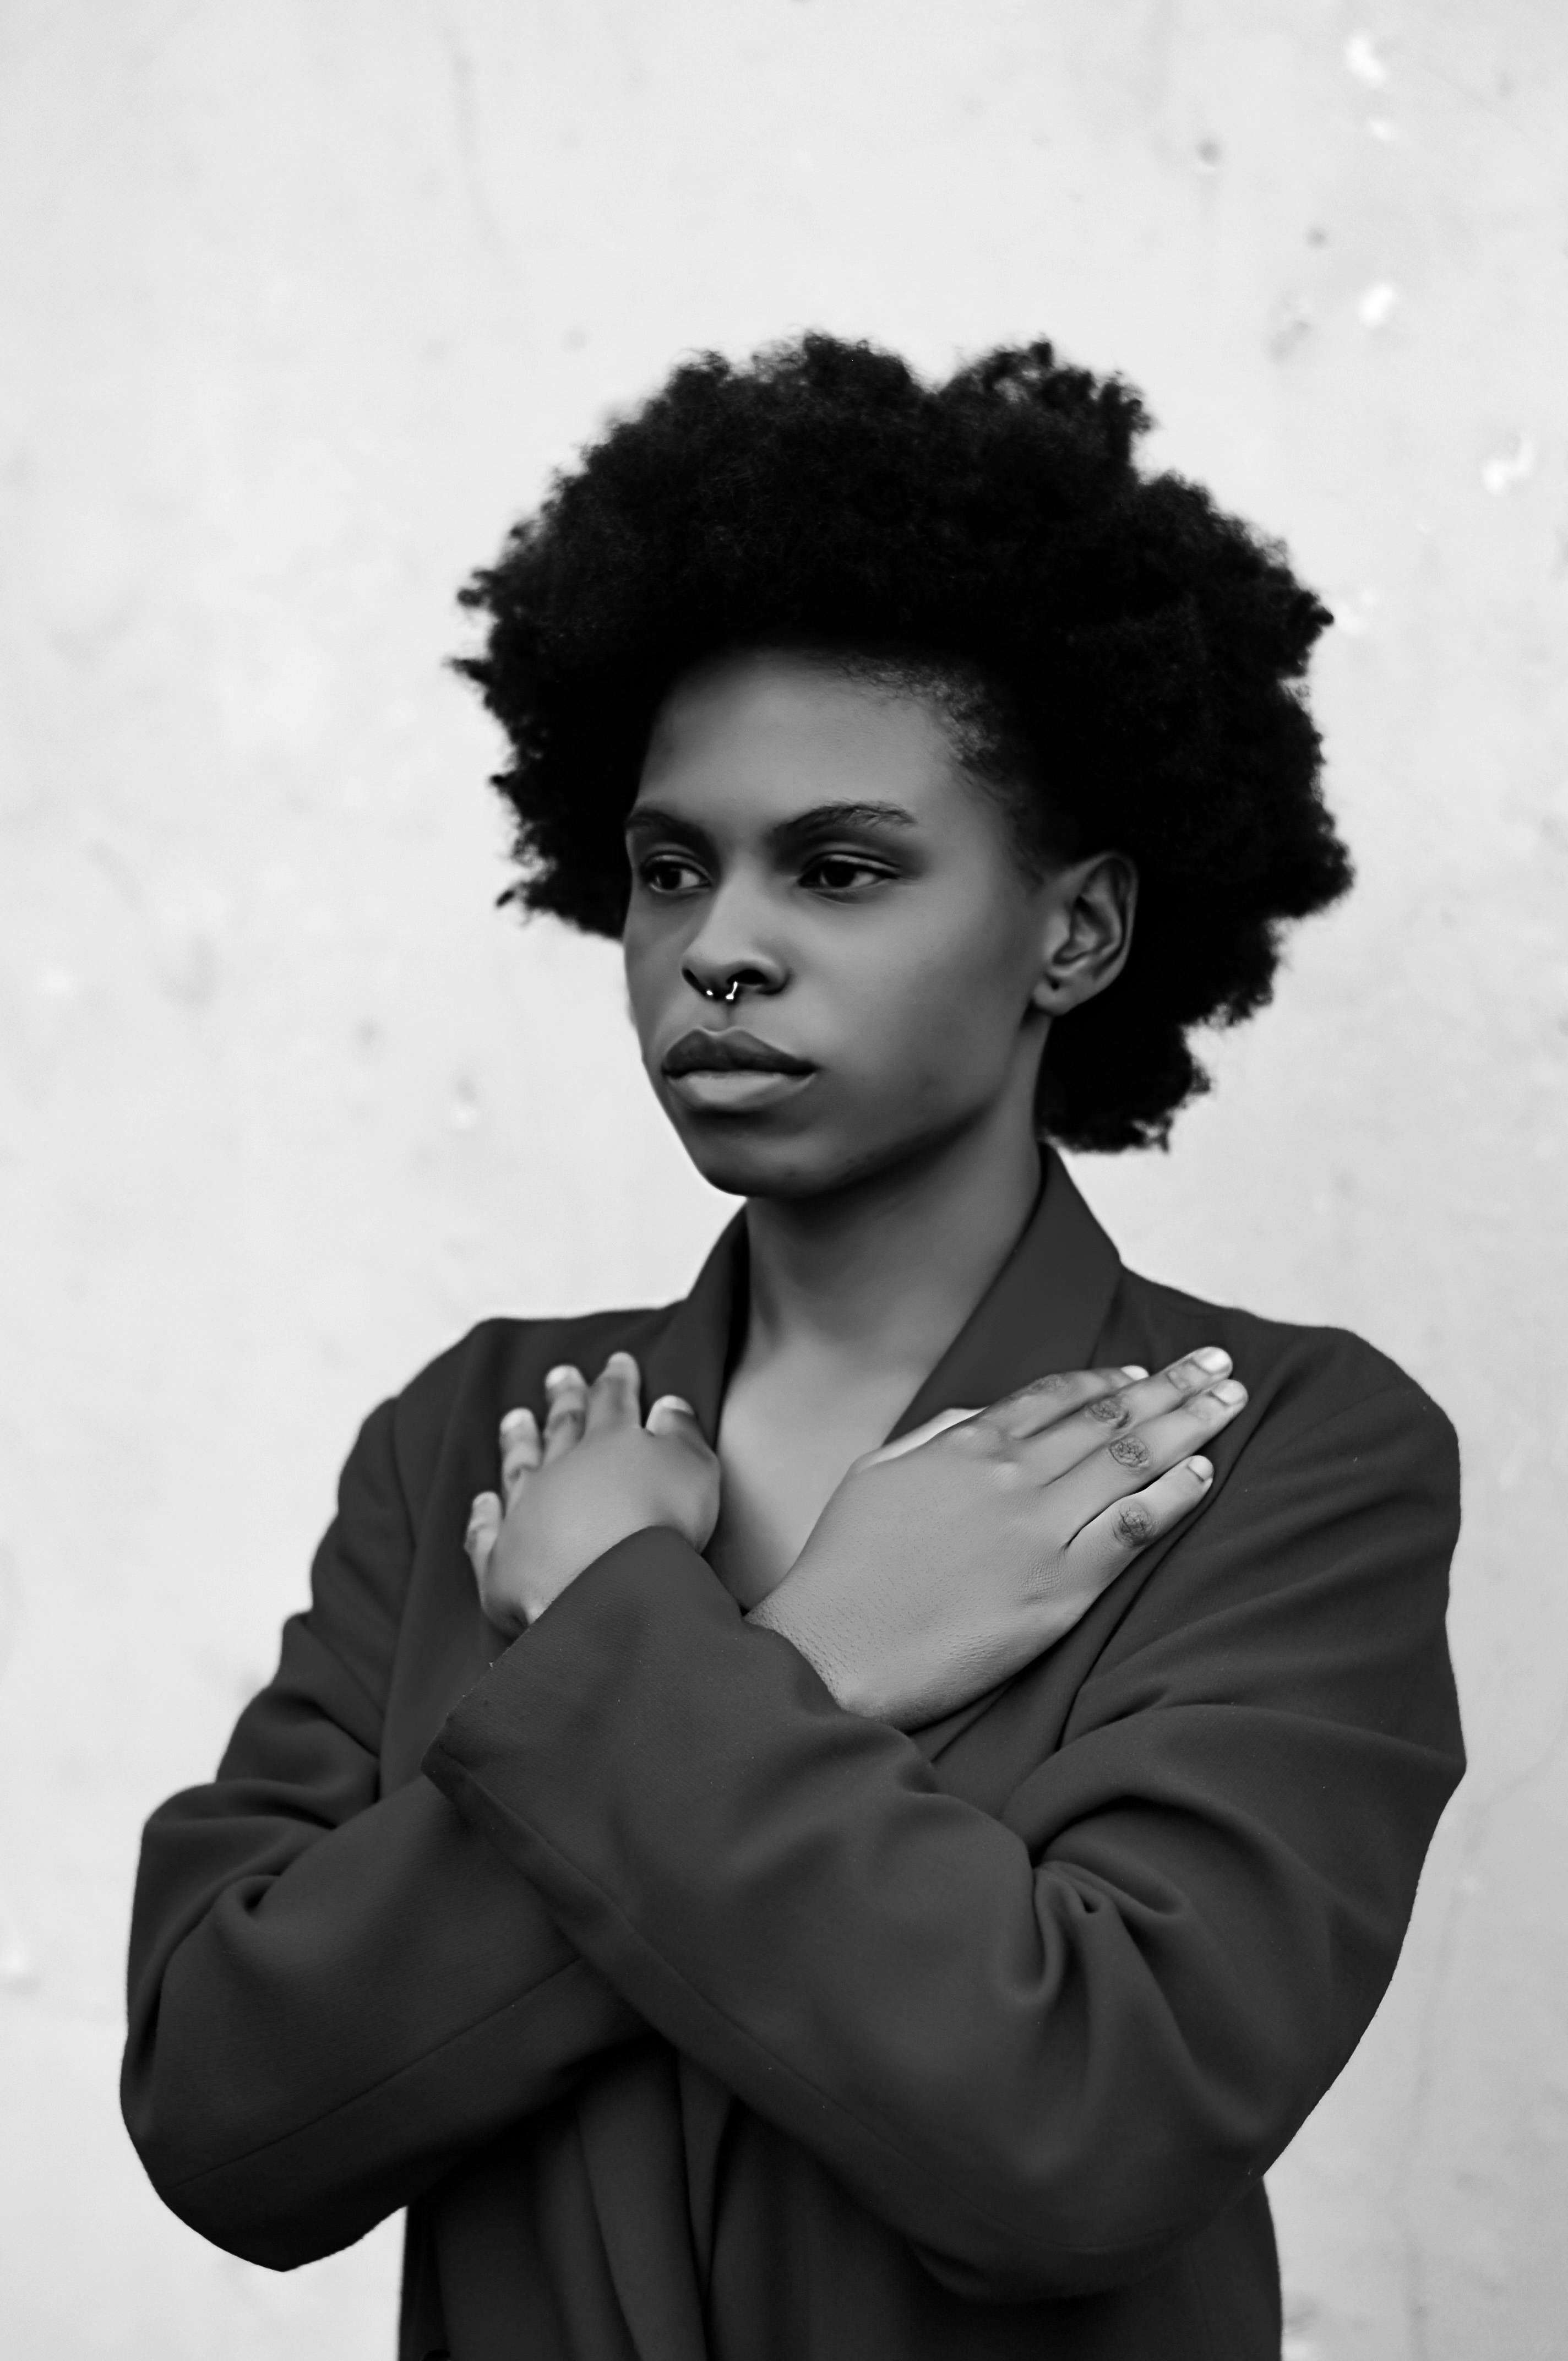 Grayscale Photo of Woman with Afro Hair Posing · Free Stock Photo